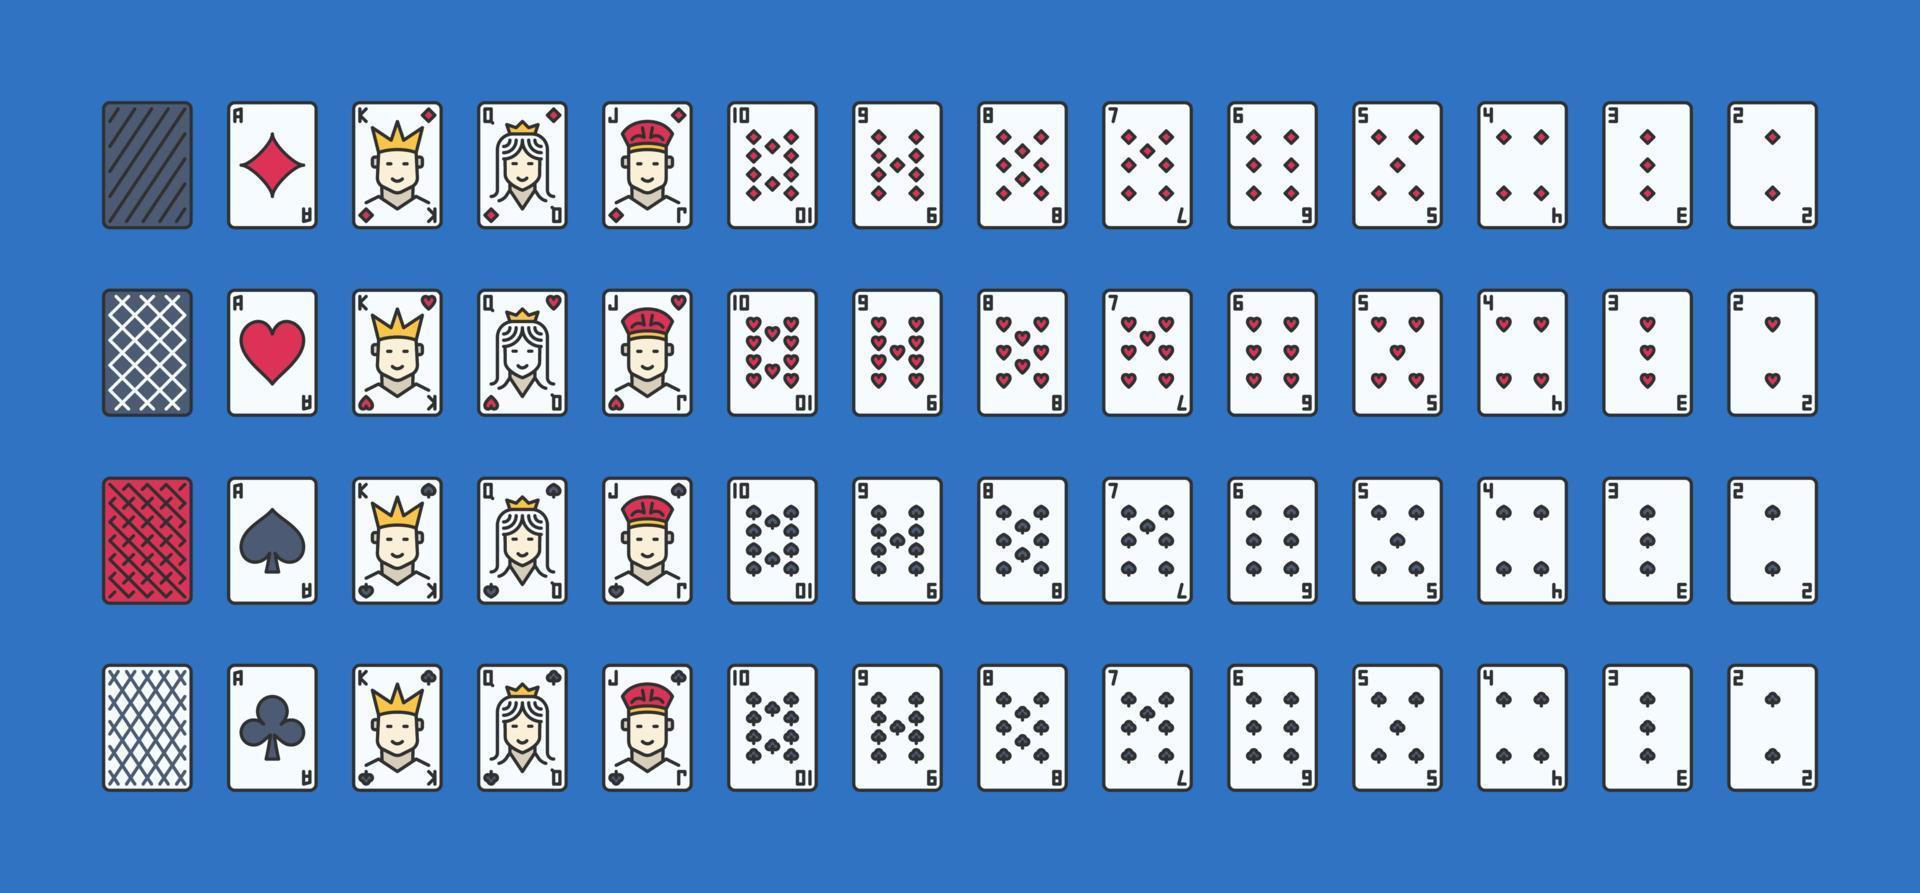 Set of Playing Cards creative vector icons. Full card deck